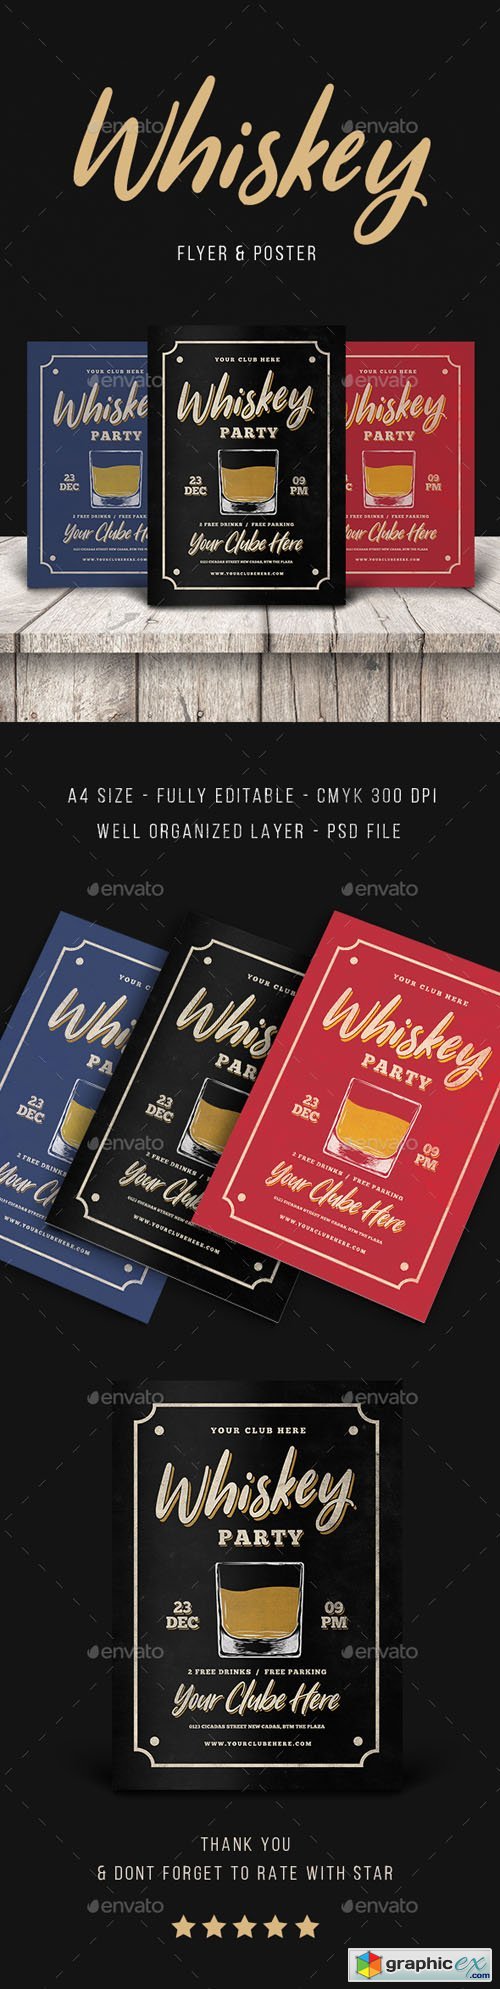 Vintage Whisky Party